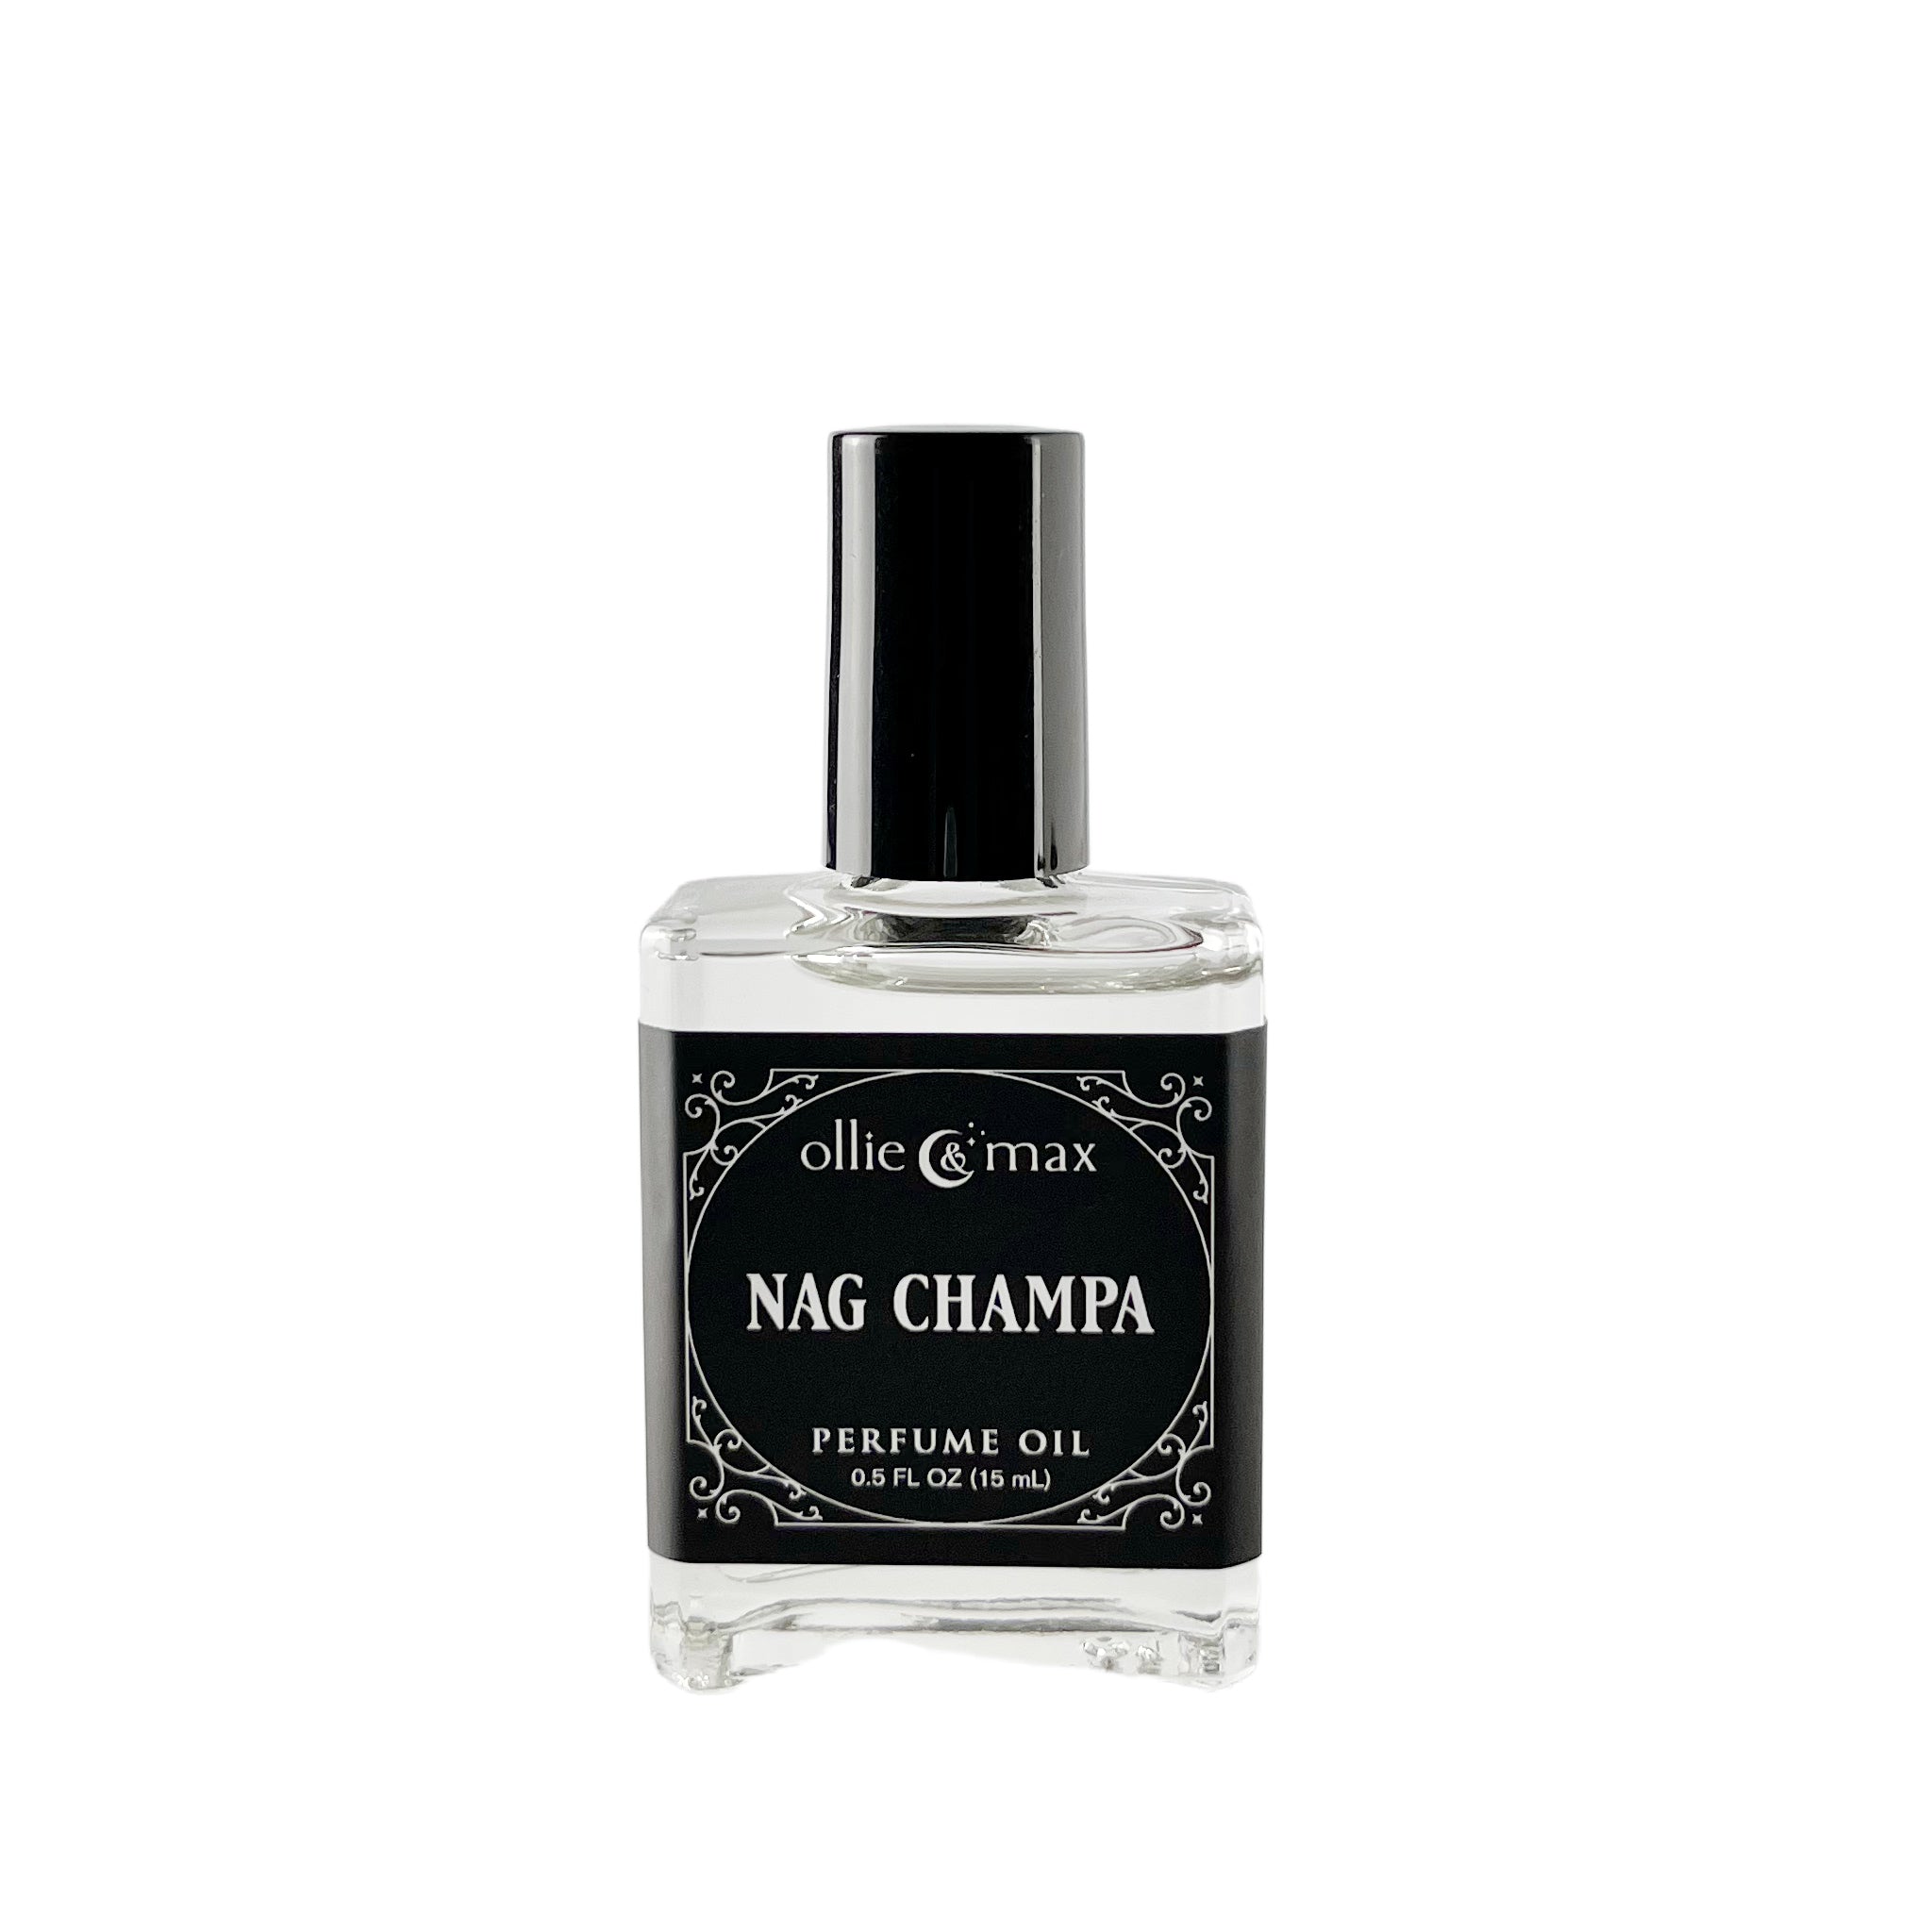 glass bottle with black label and cap, nag champs perfume oil, 15ml